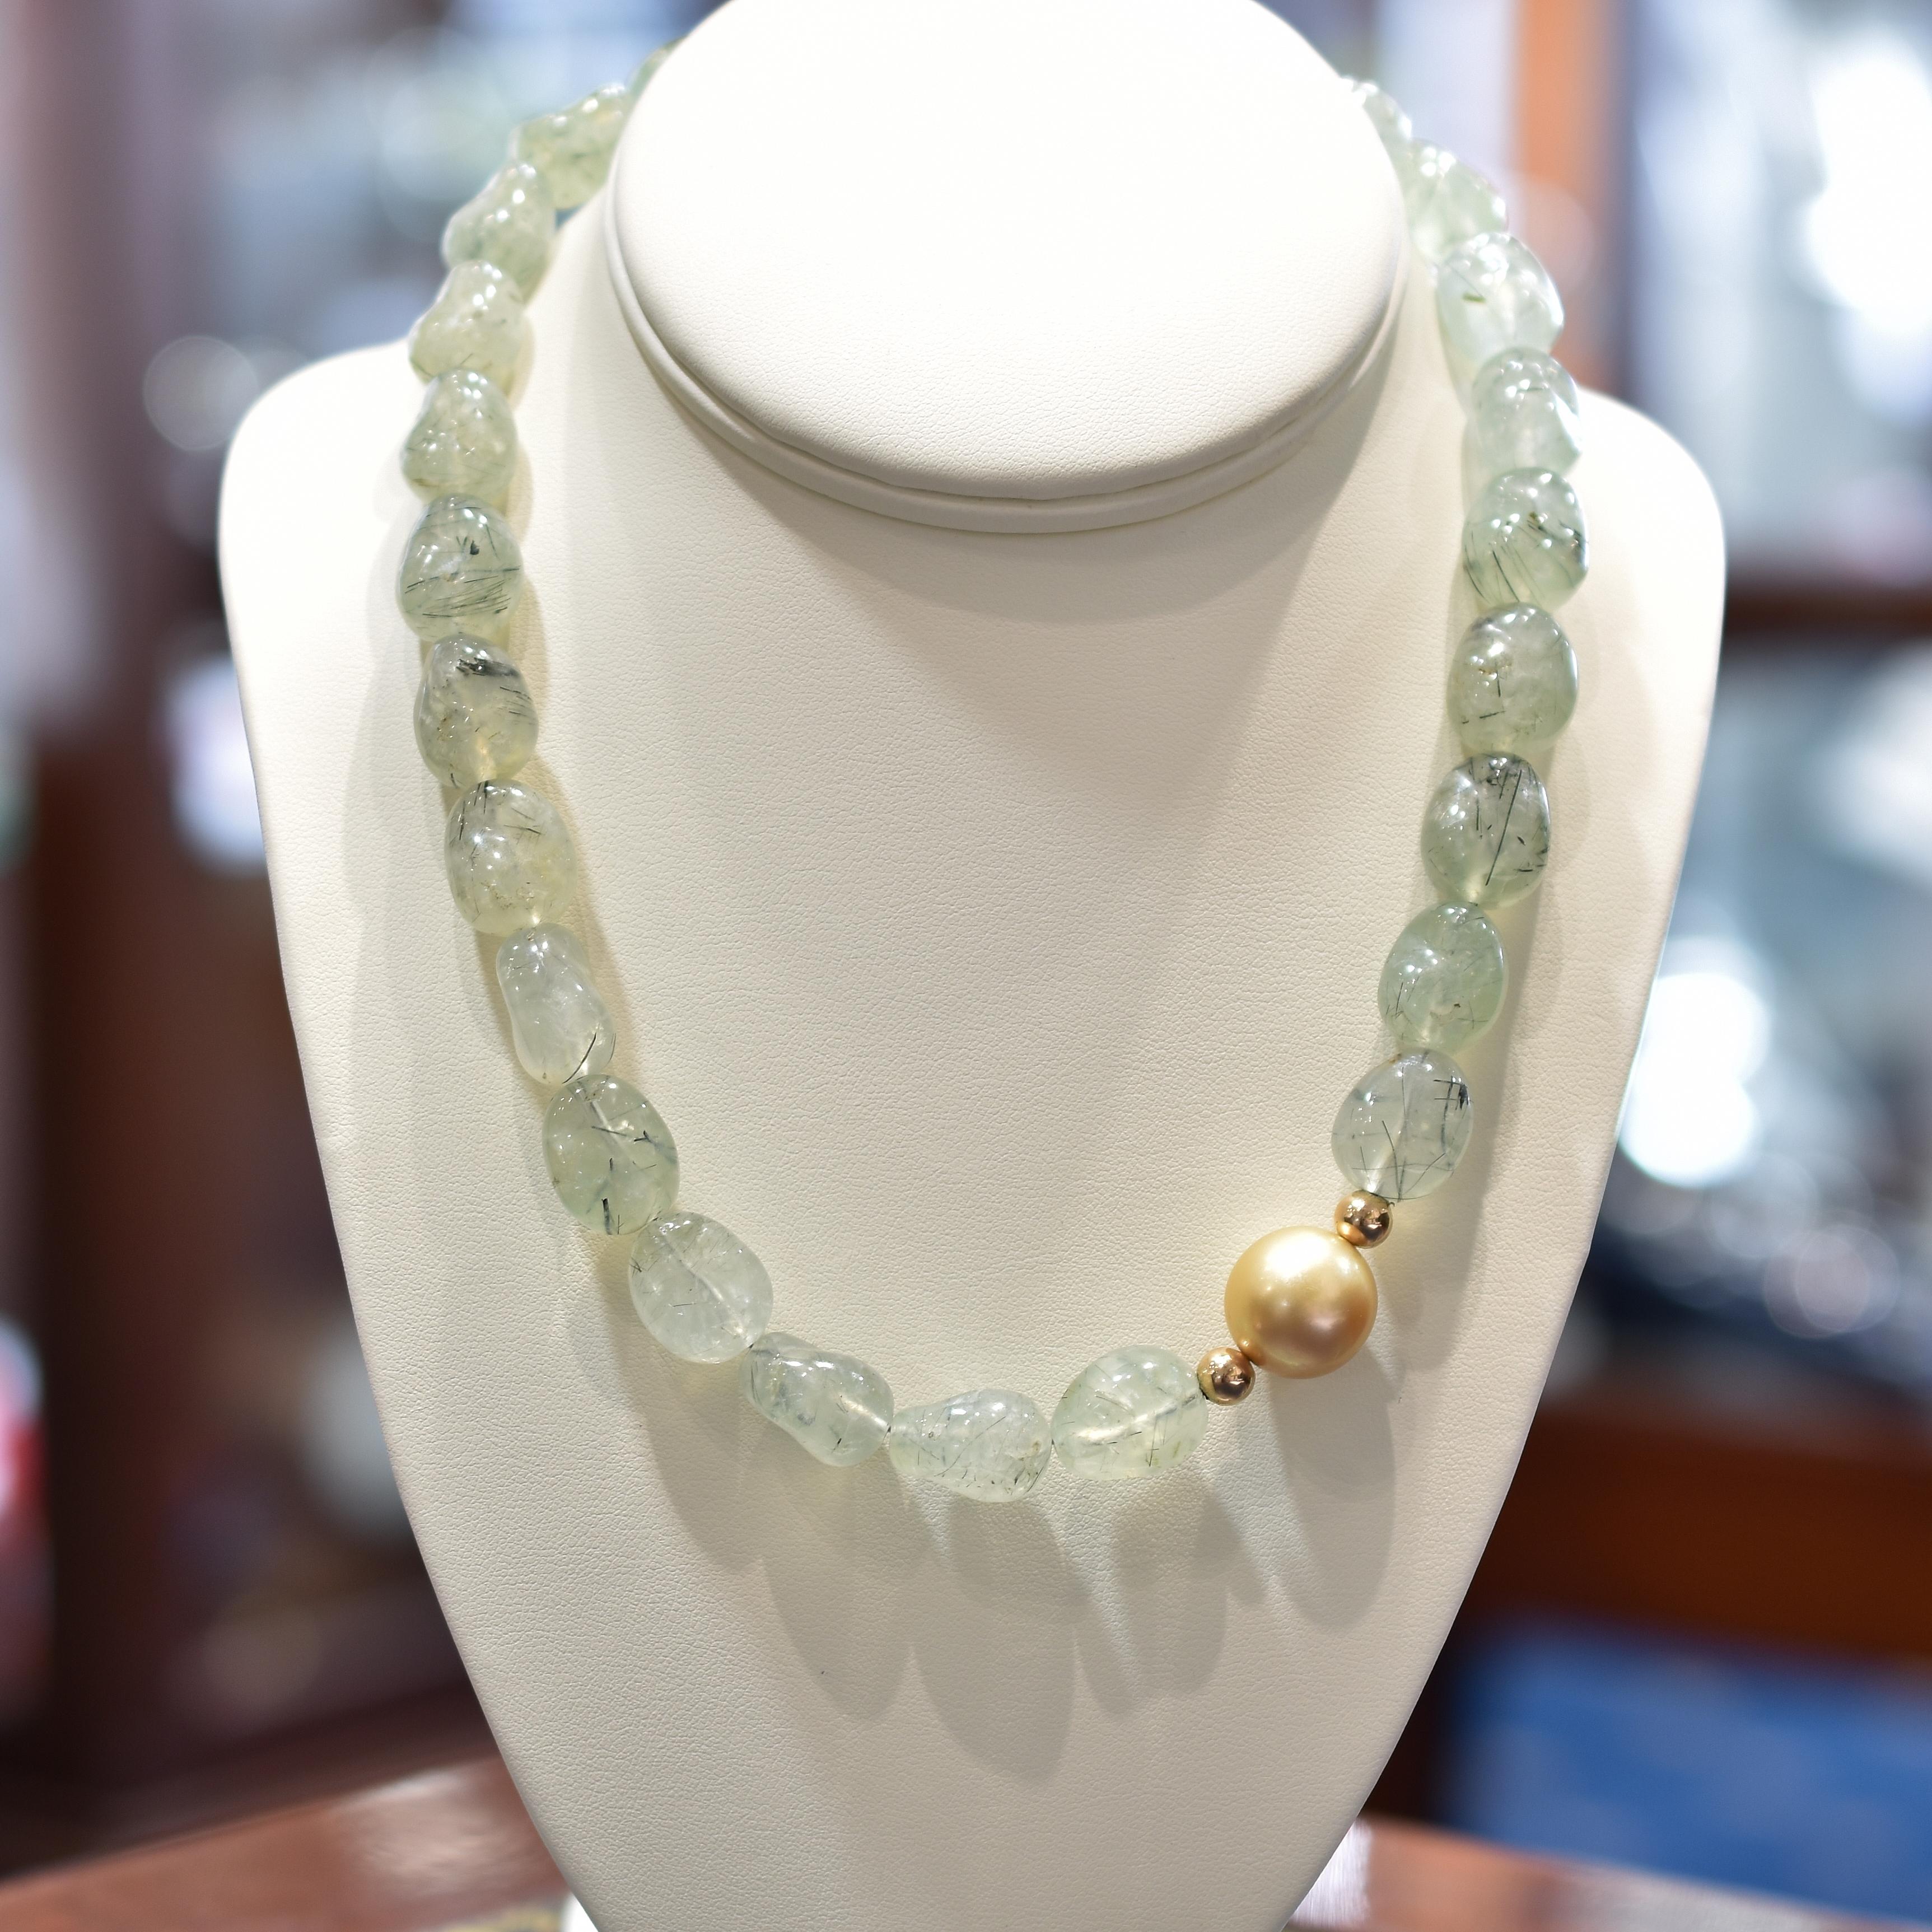 Prehnite and 15mm golden Australian South Sea pearl necklace with sterling silver yellow gold plated magnetic clasp. South Sea Pearl is cultured, golden colour and of a fine lustre